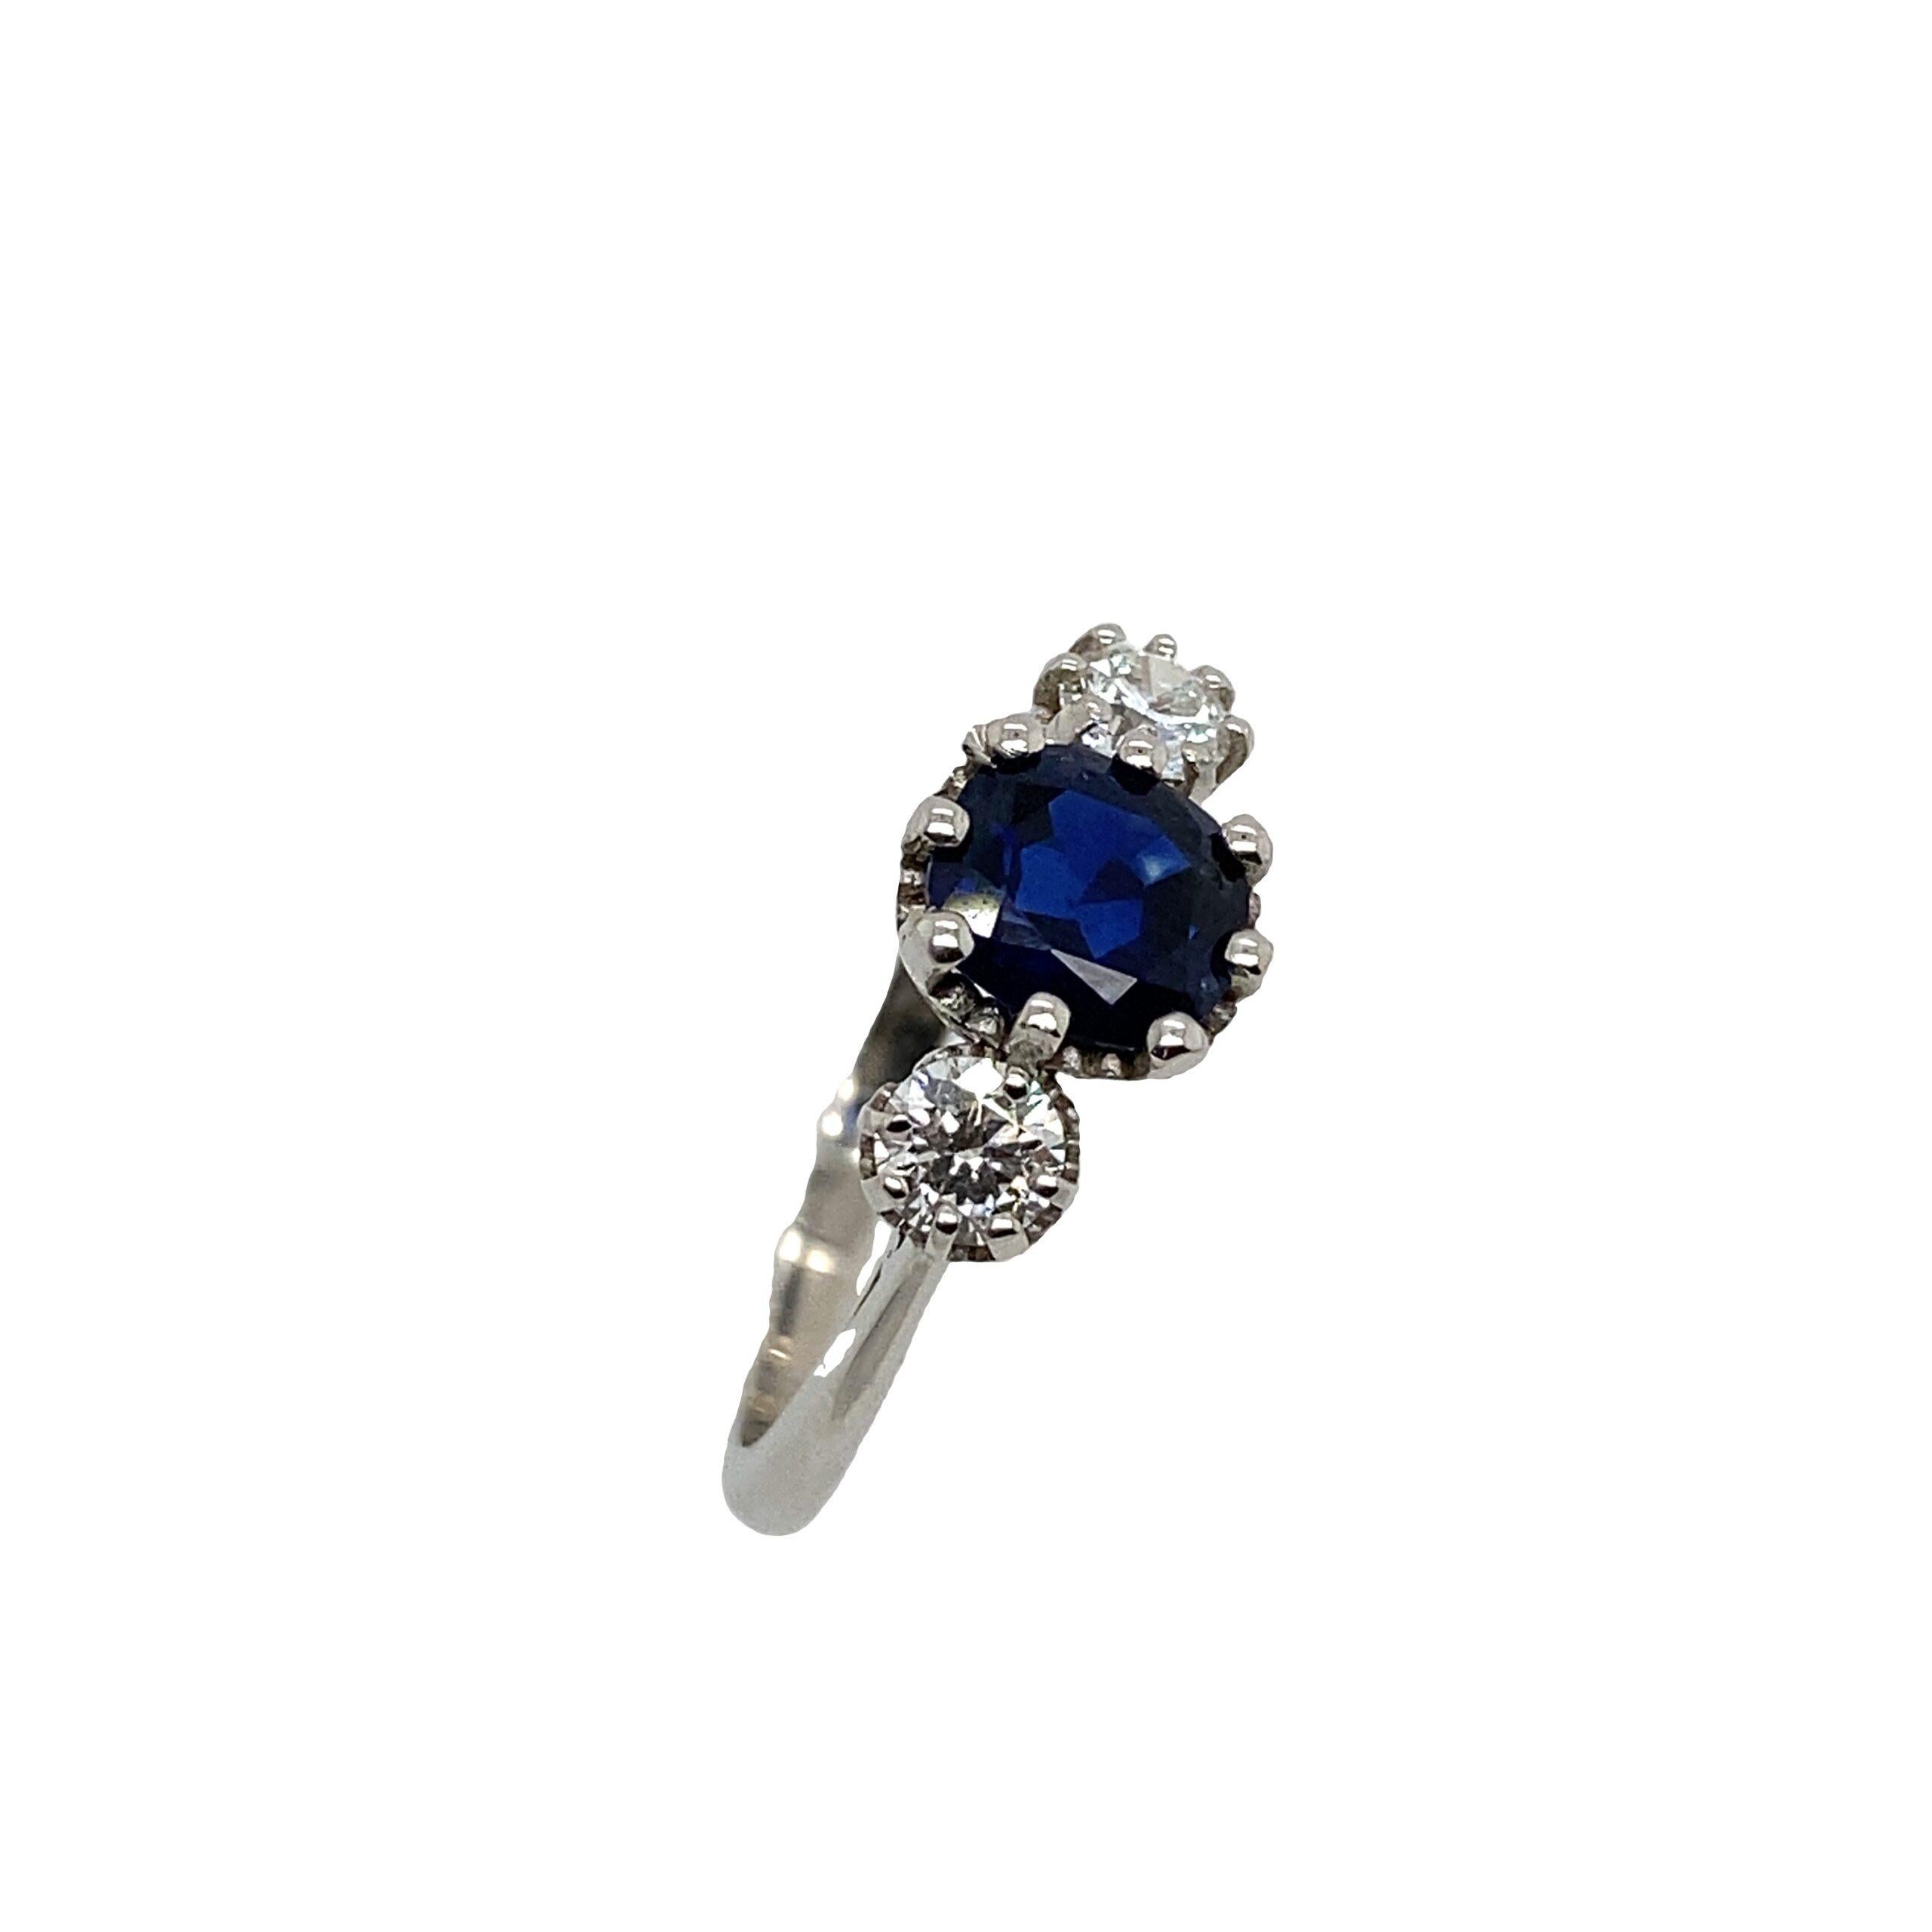 Platinum 3 Stone Very Finest Blue 1.06ct Sapphire Ring with 0.39ct of Diamonds

Additional Information:
Sapphire is from Thailand
Total Diamond Weight: 0.39ct
Diamond Colour: G
Diamond Clarity: VS
Total Weight: 3.9g Ring Size: M 1/2